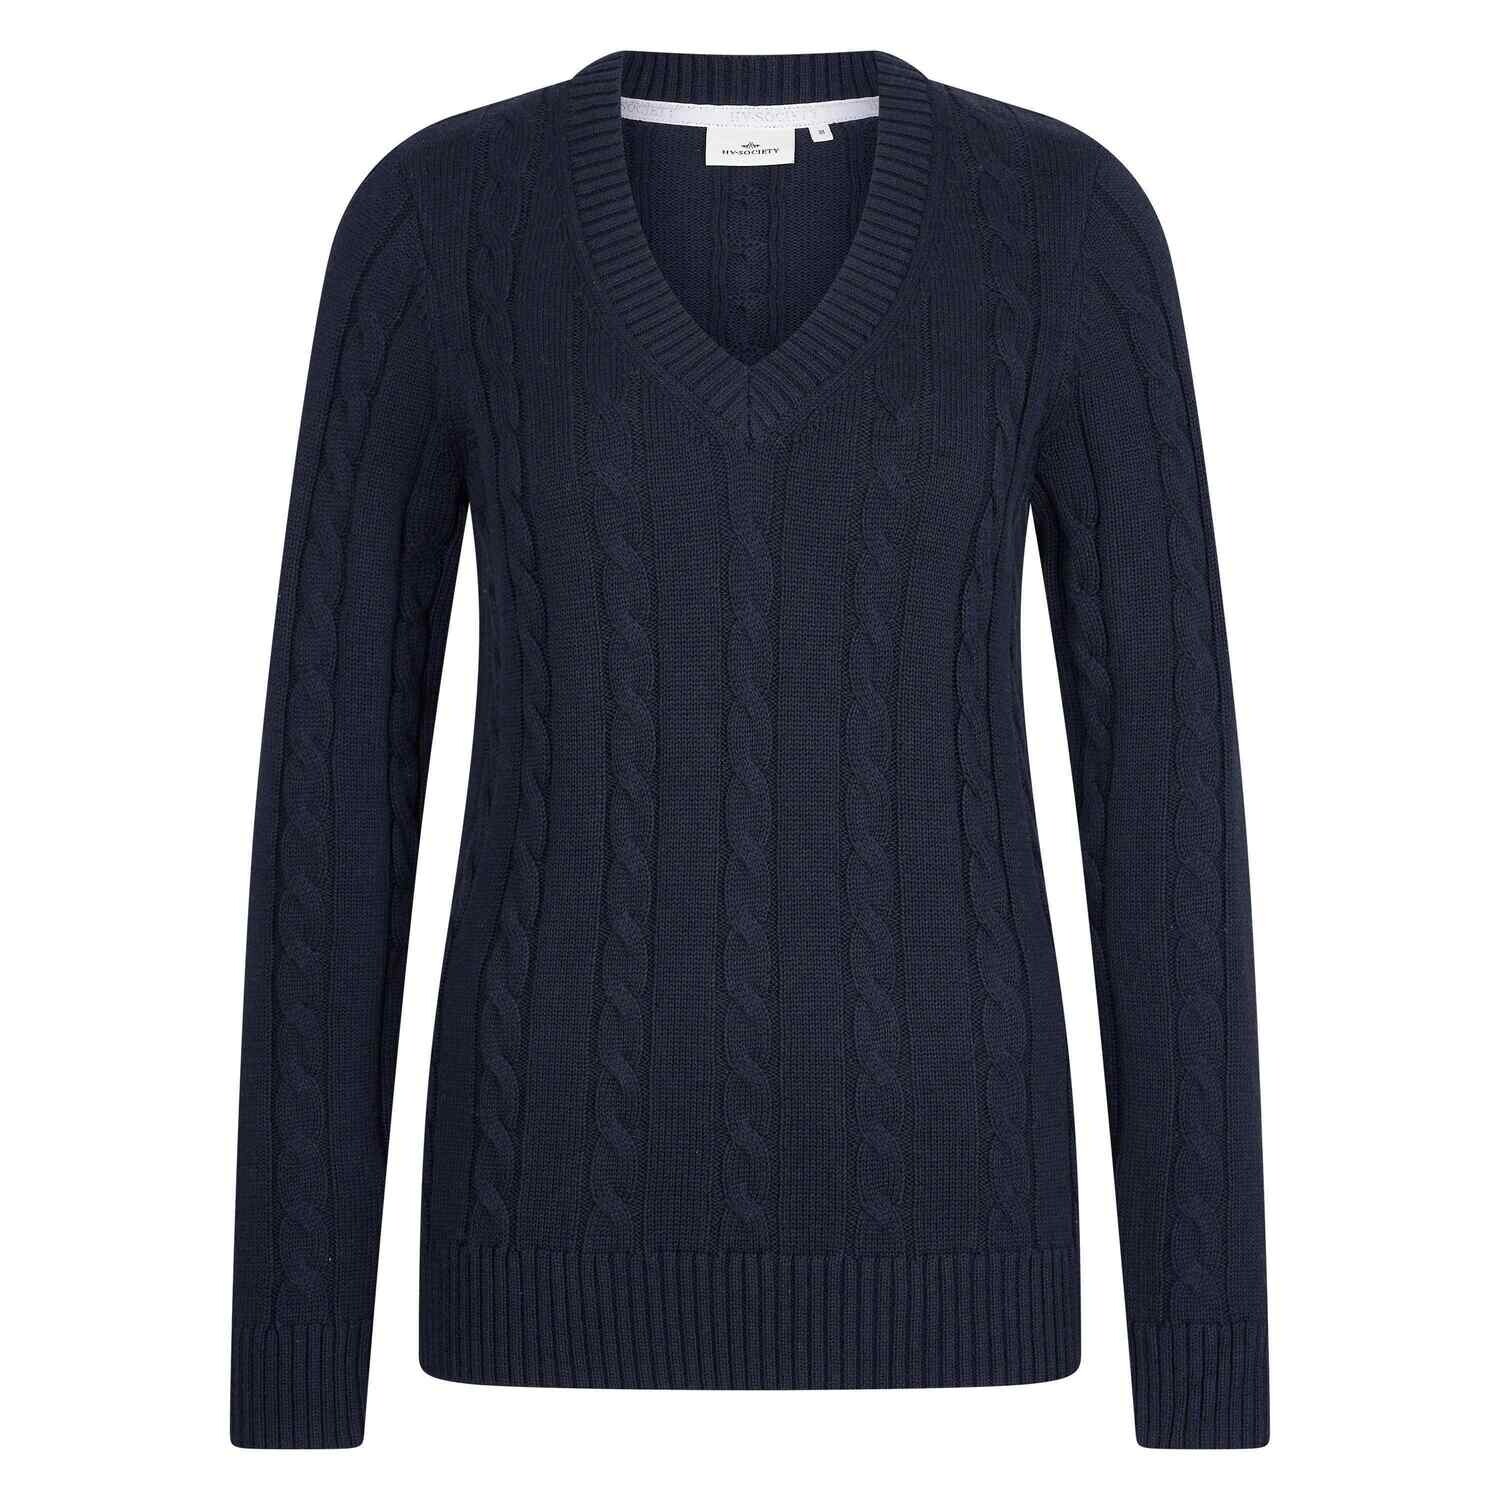 HV Society Knitted pullover Odile, navy